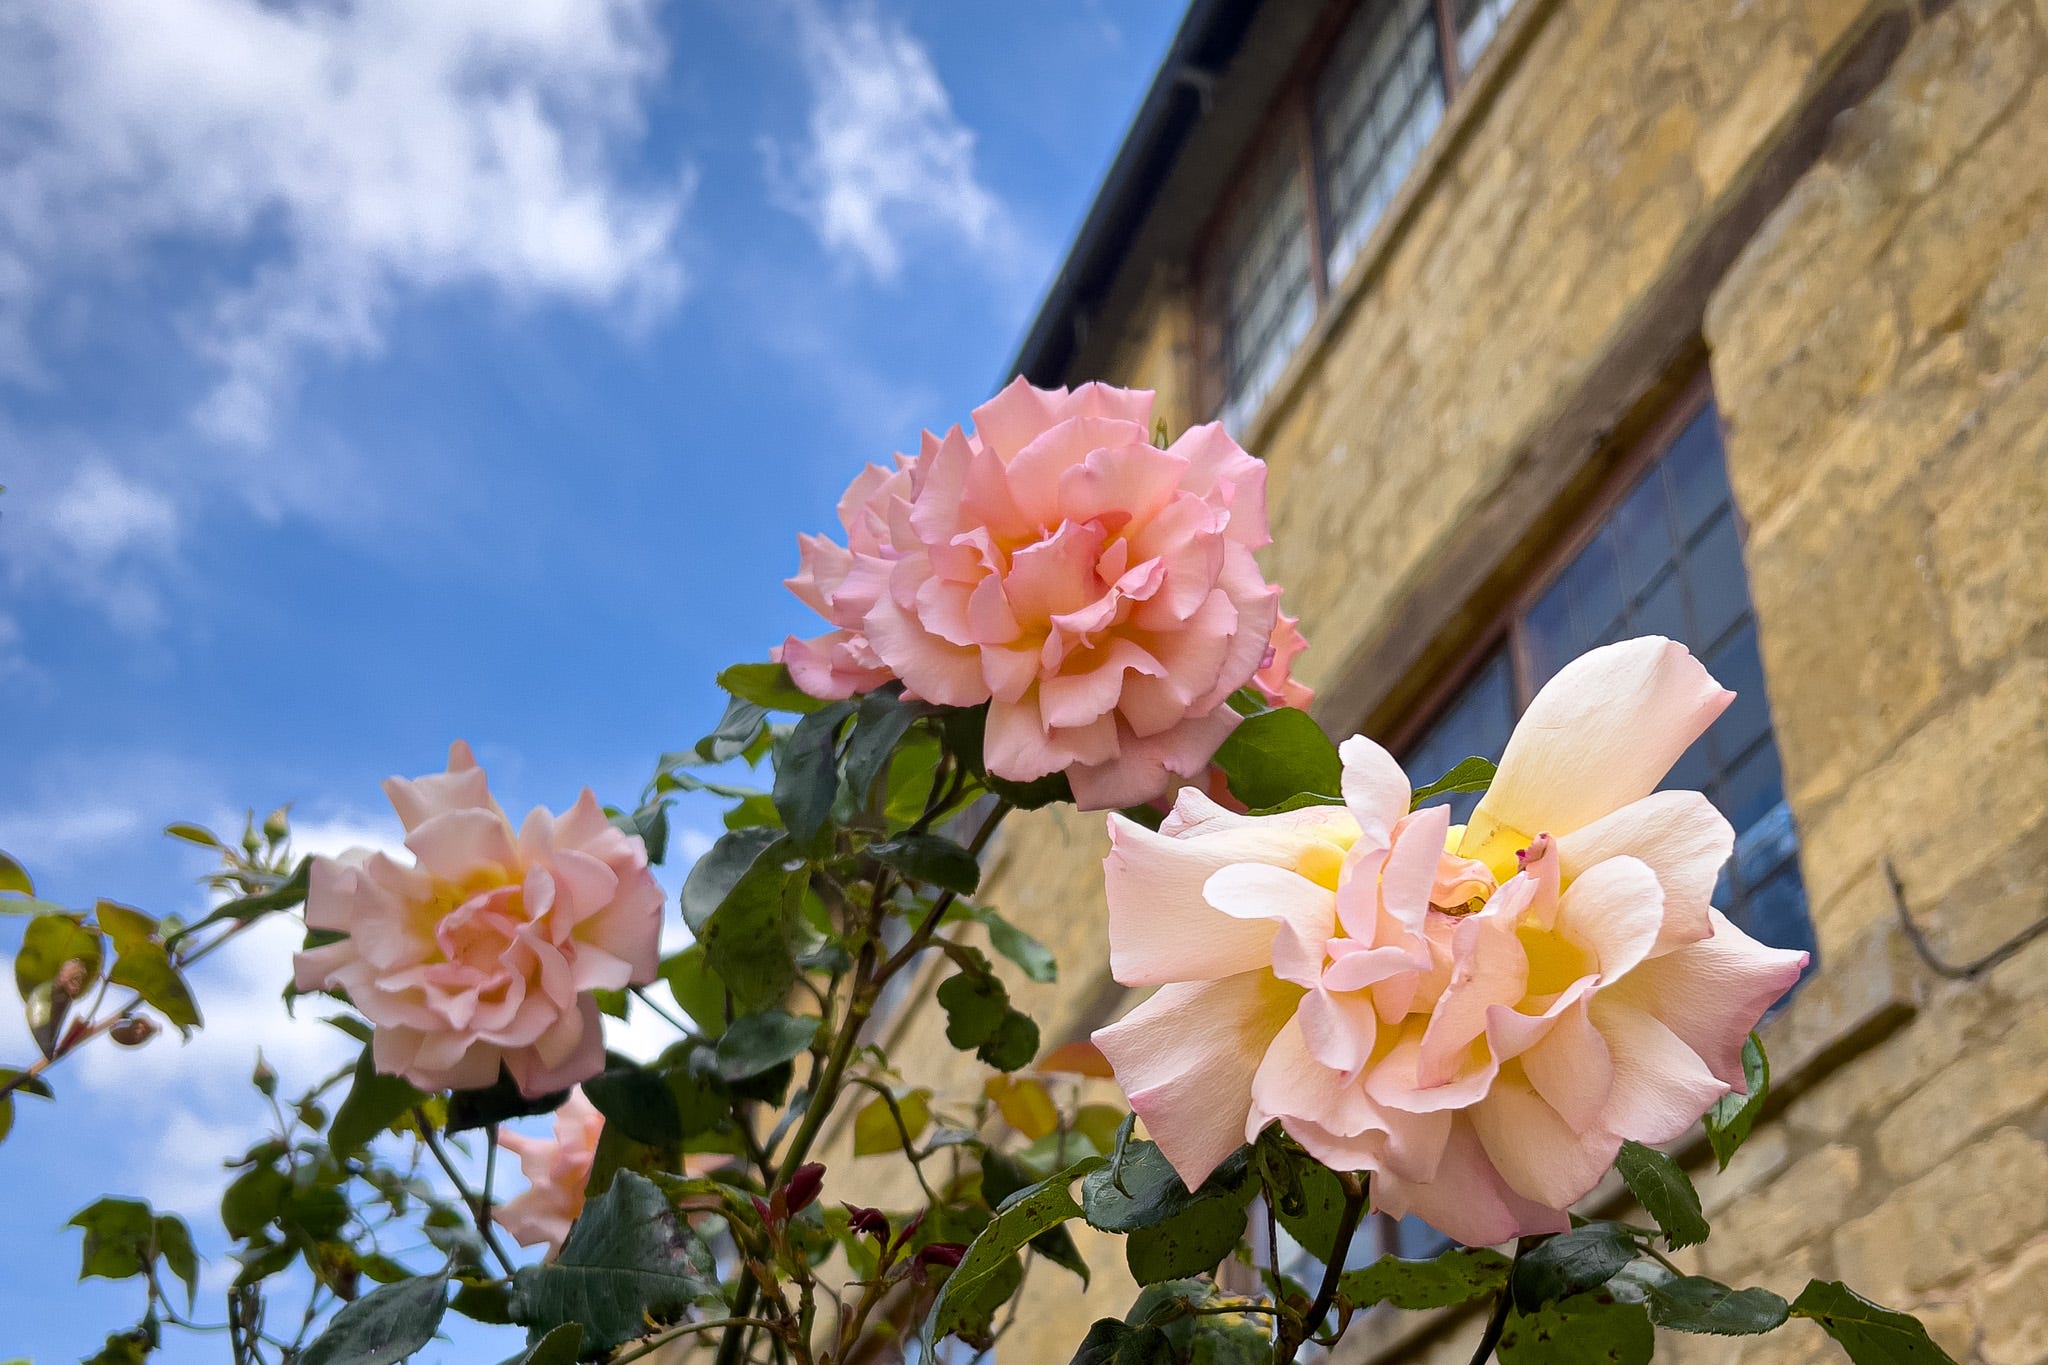 Pink roses against a yellow stone cottage in the Cotswolds, England with a blue sky and fluffy clouds in the background.